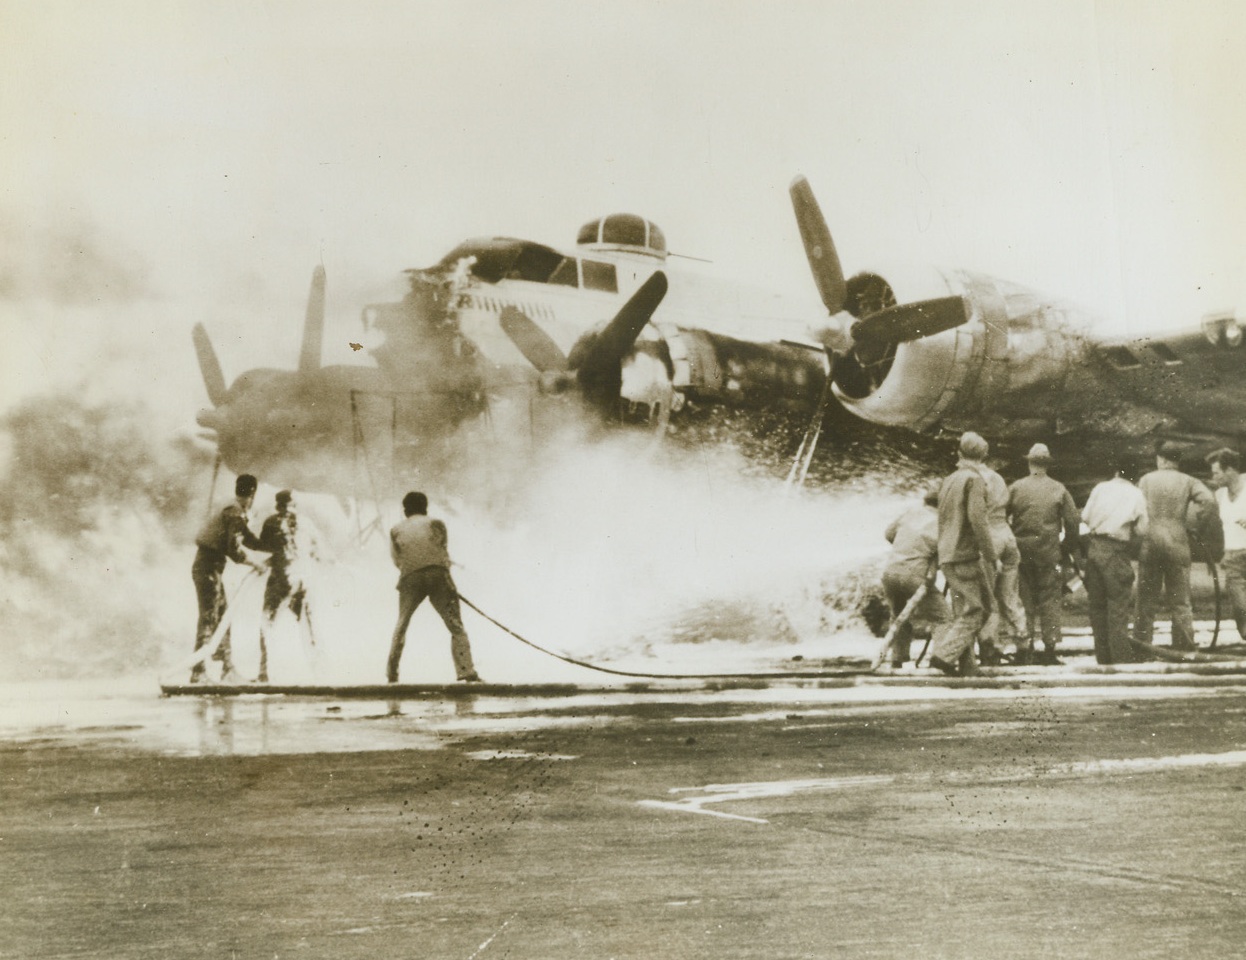 Work on Fired B-17, 8/30/1944. England – An Engineer Aviation Fire Fighting Platoon works hard to put out a fire on a B-17 Flying Fortress at a base in England. Fortresses carry a heavy load of gasoline and often have a full bomb load when fire breaks out. Credit: USAAF photo from ACME;